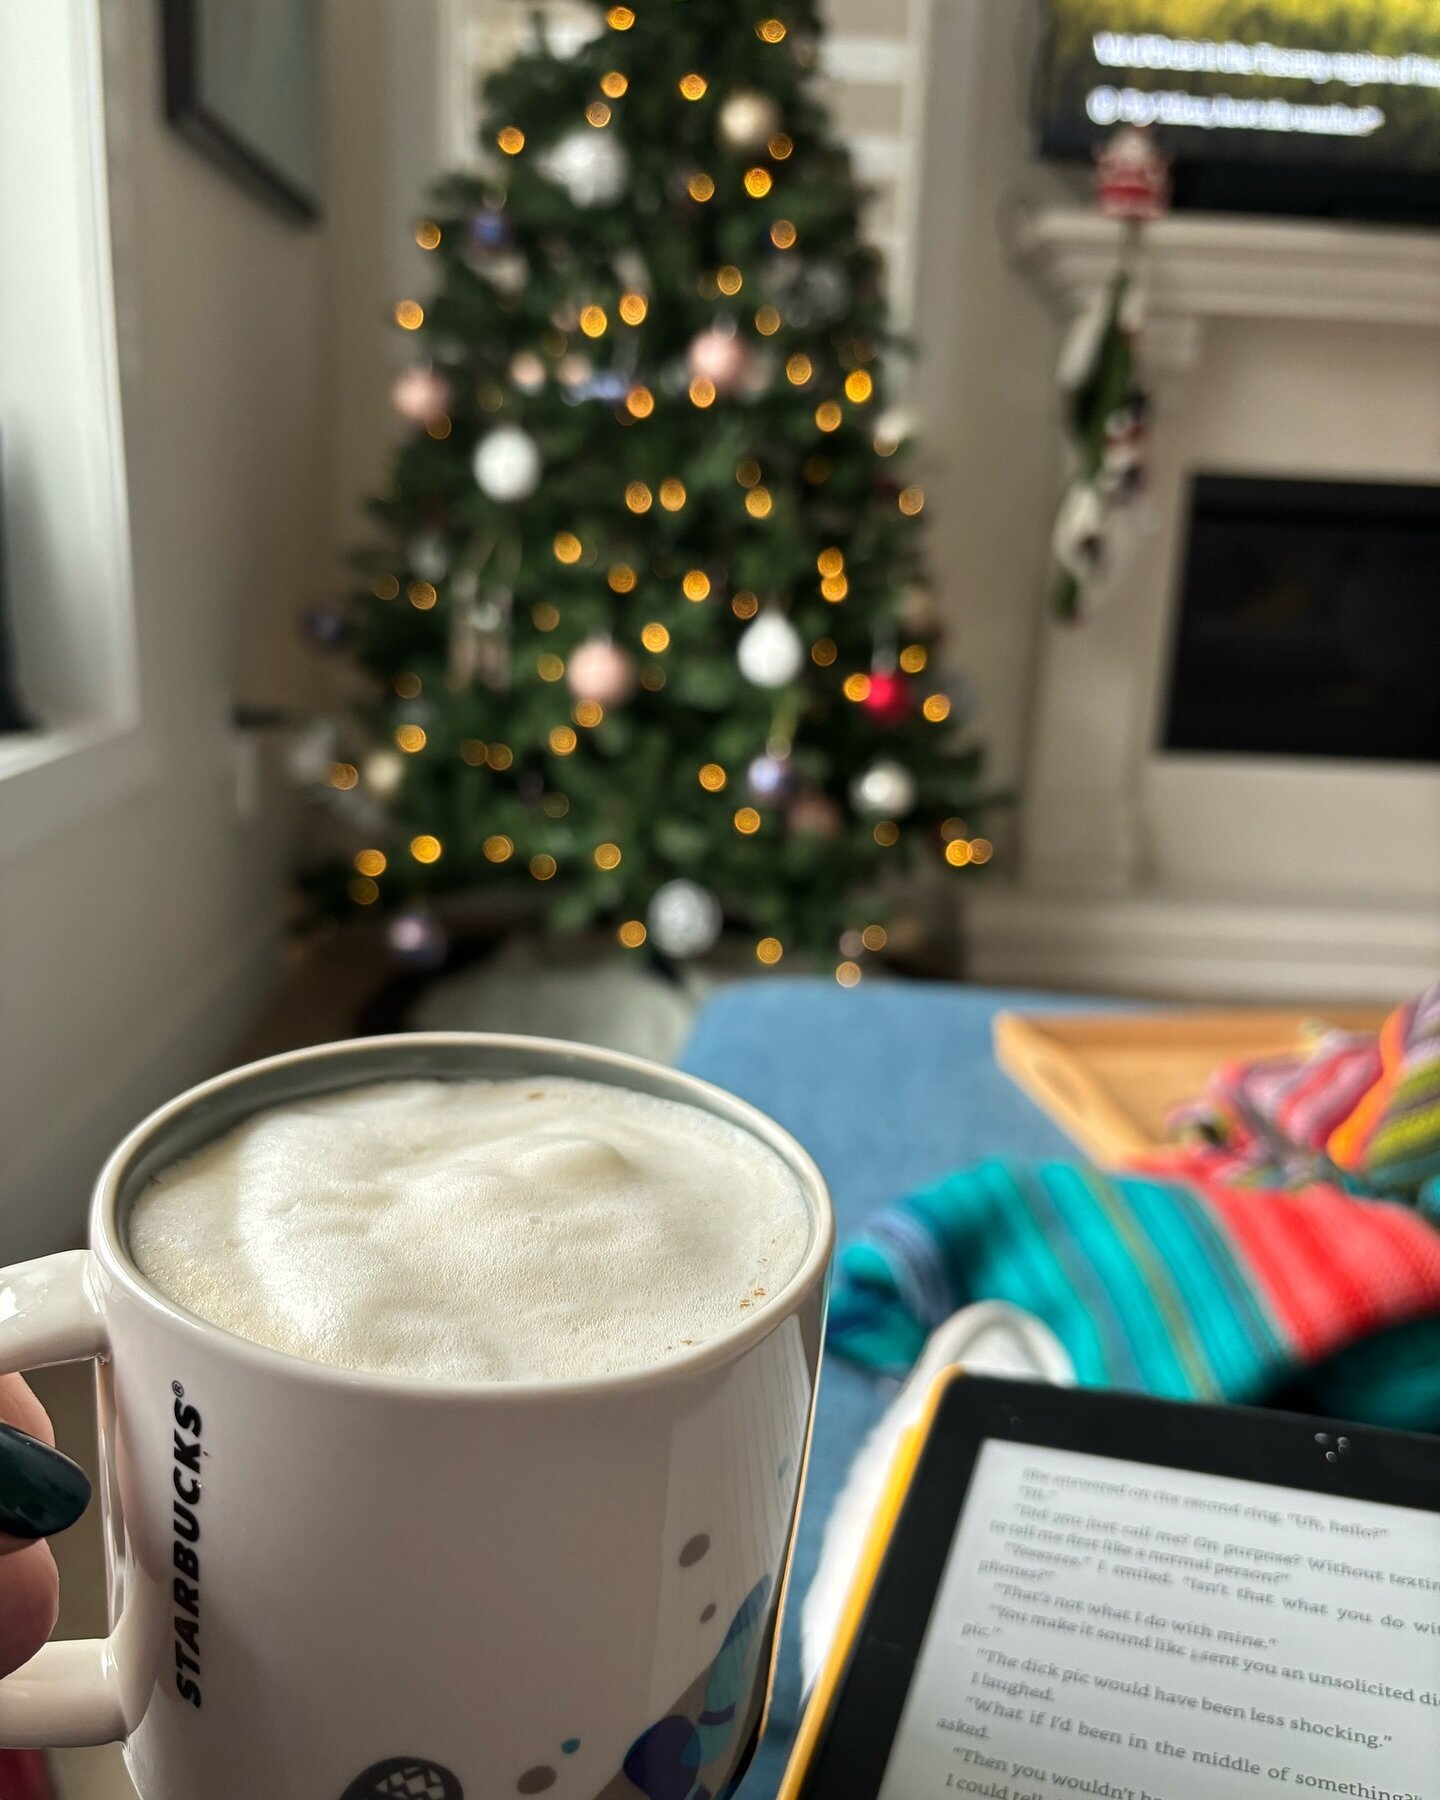 Happiness today is&hellip; sipping a homemade eggnog latte and reading with my Christmas tree glowing in the background. What does happiness look like for you today?